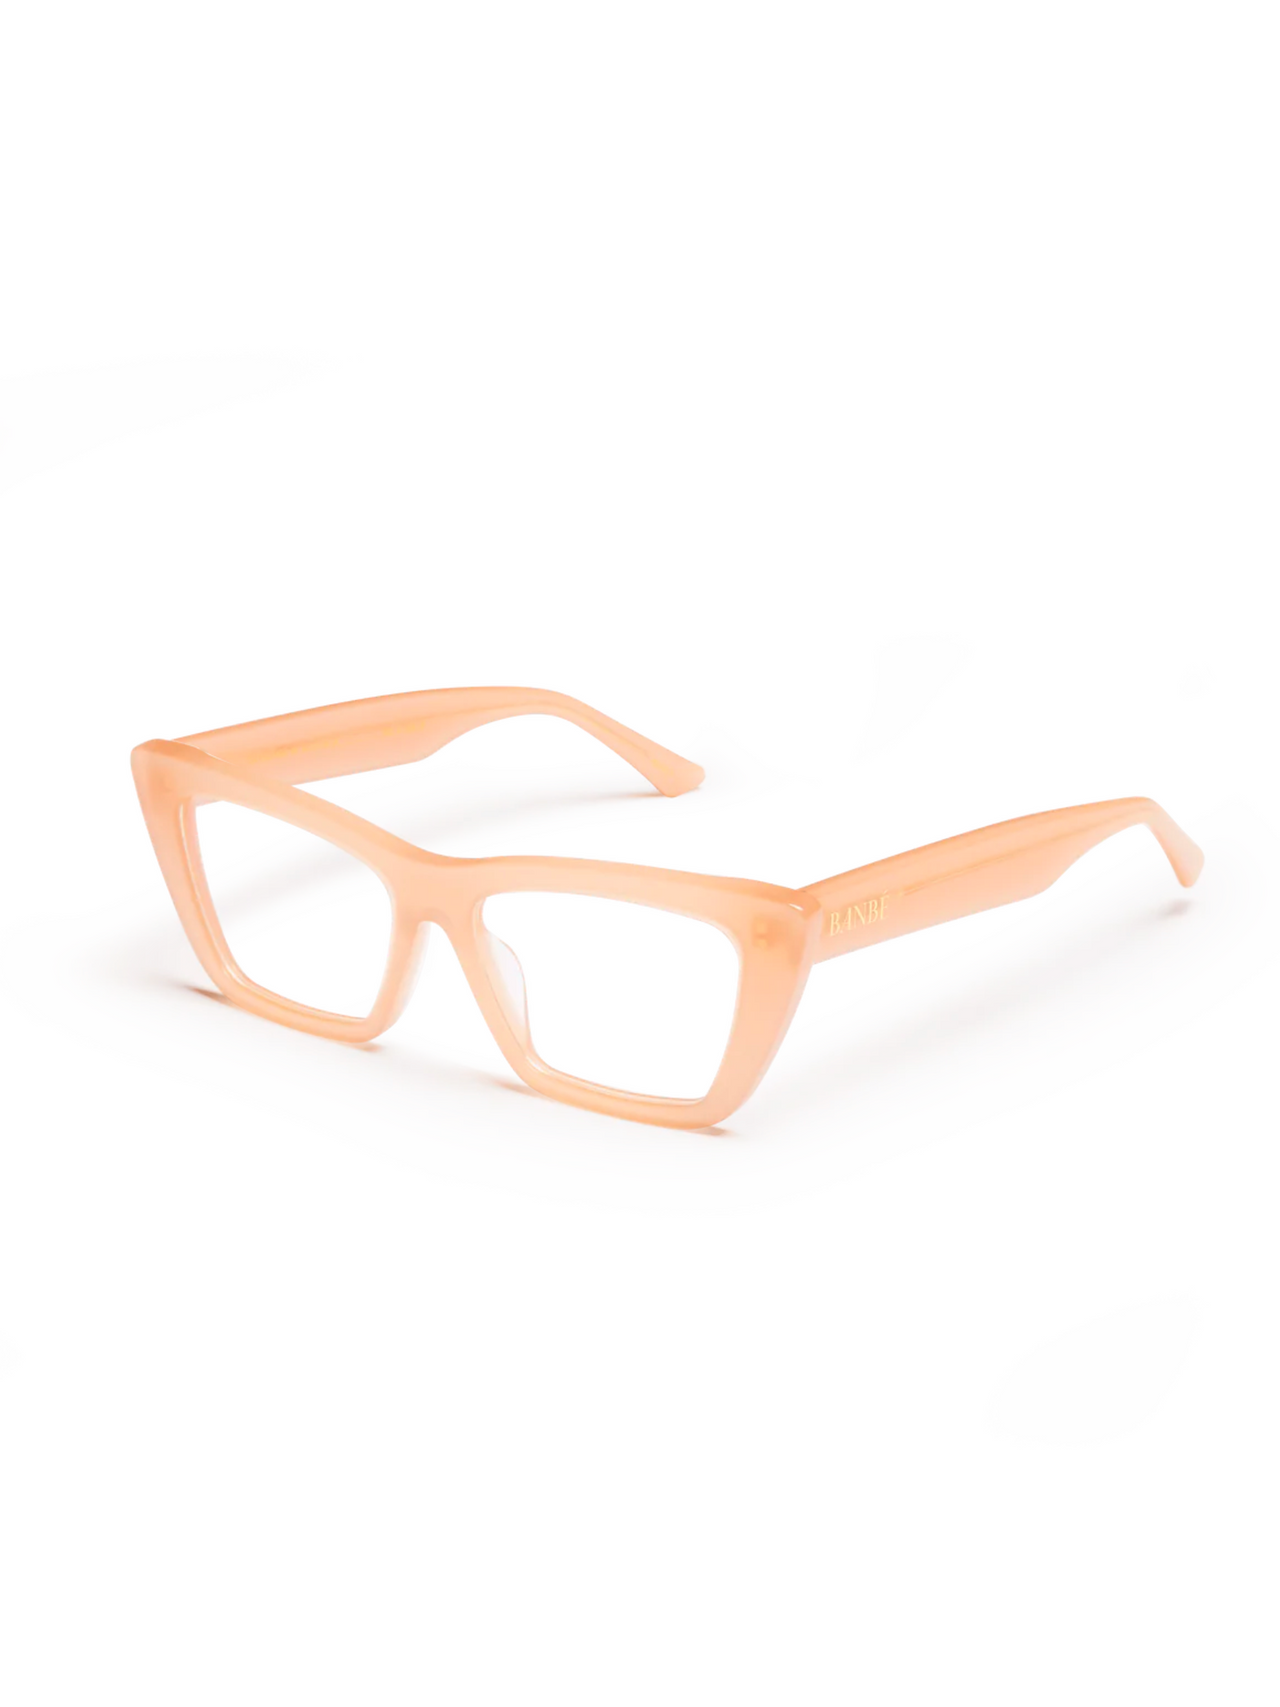 The Banks Blue Light Glasses Nude, Sunglass Acc by BANBE Eyewear | LIT Boutique